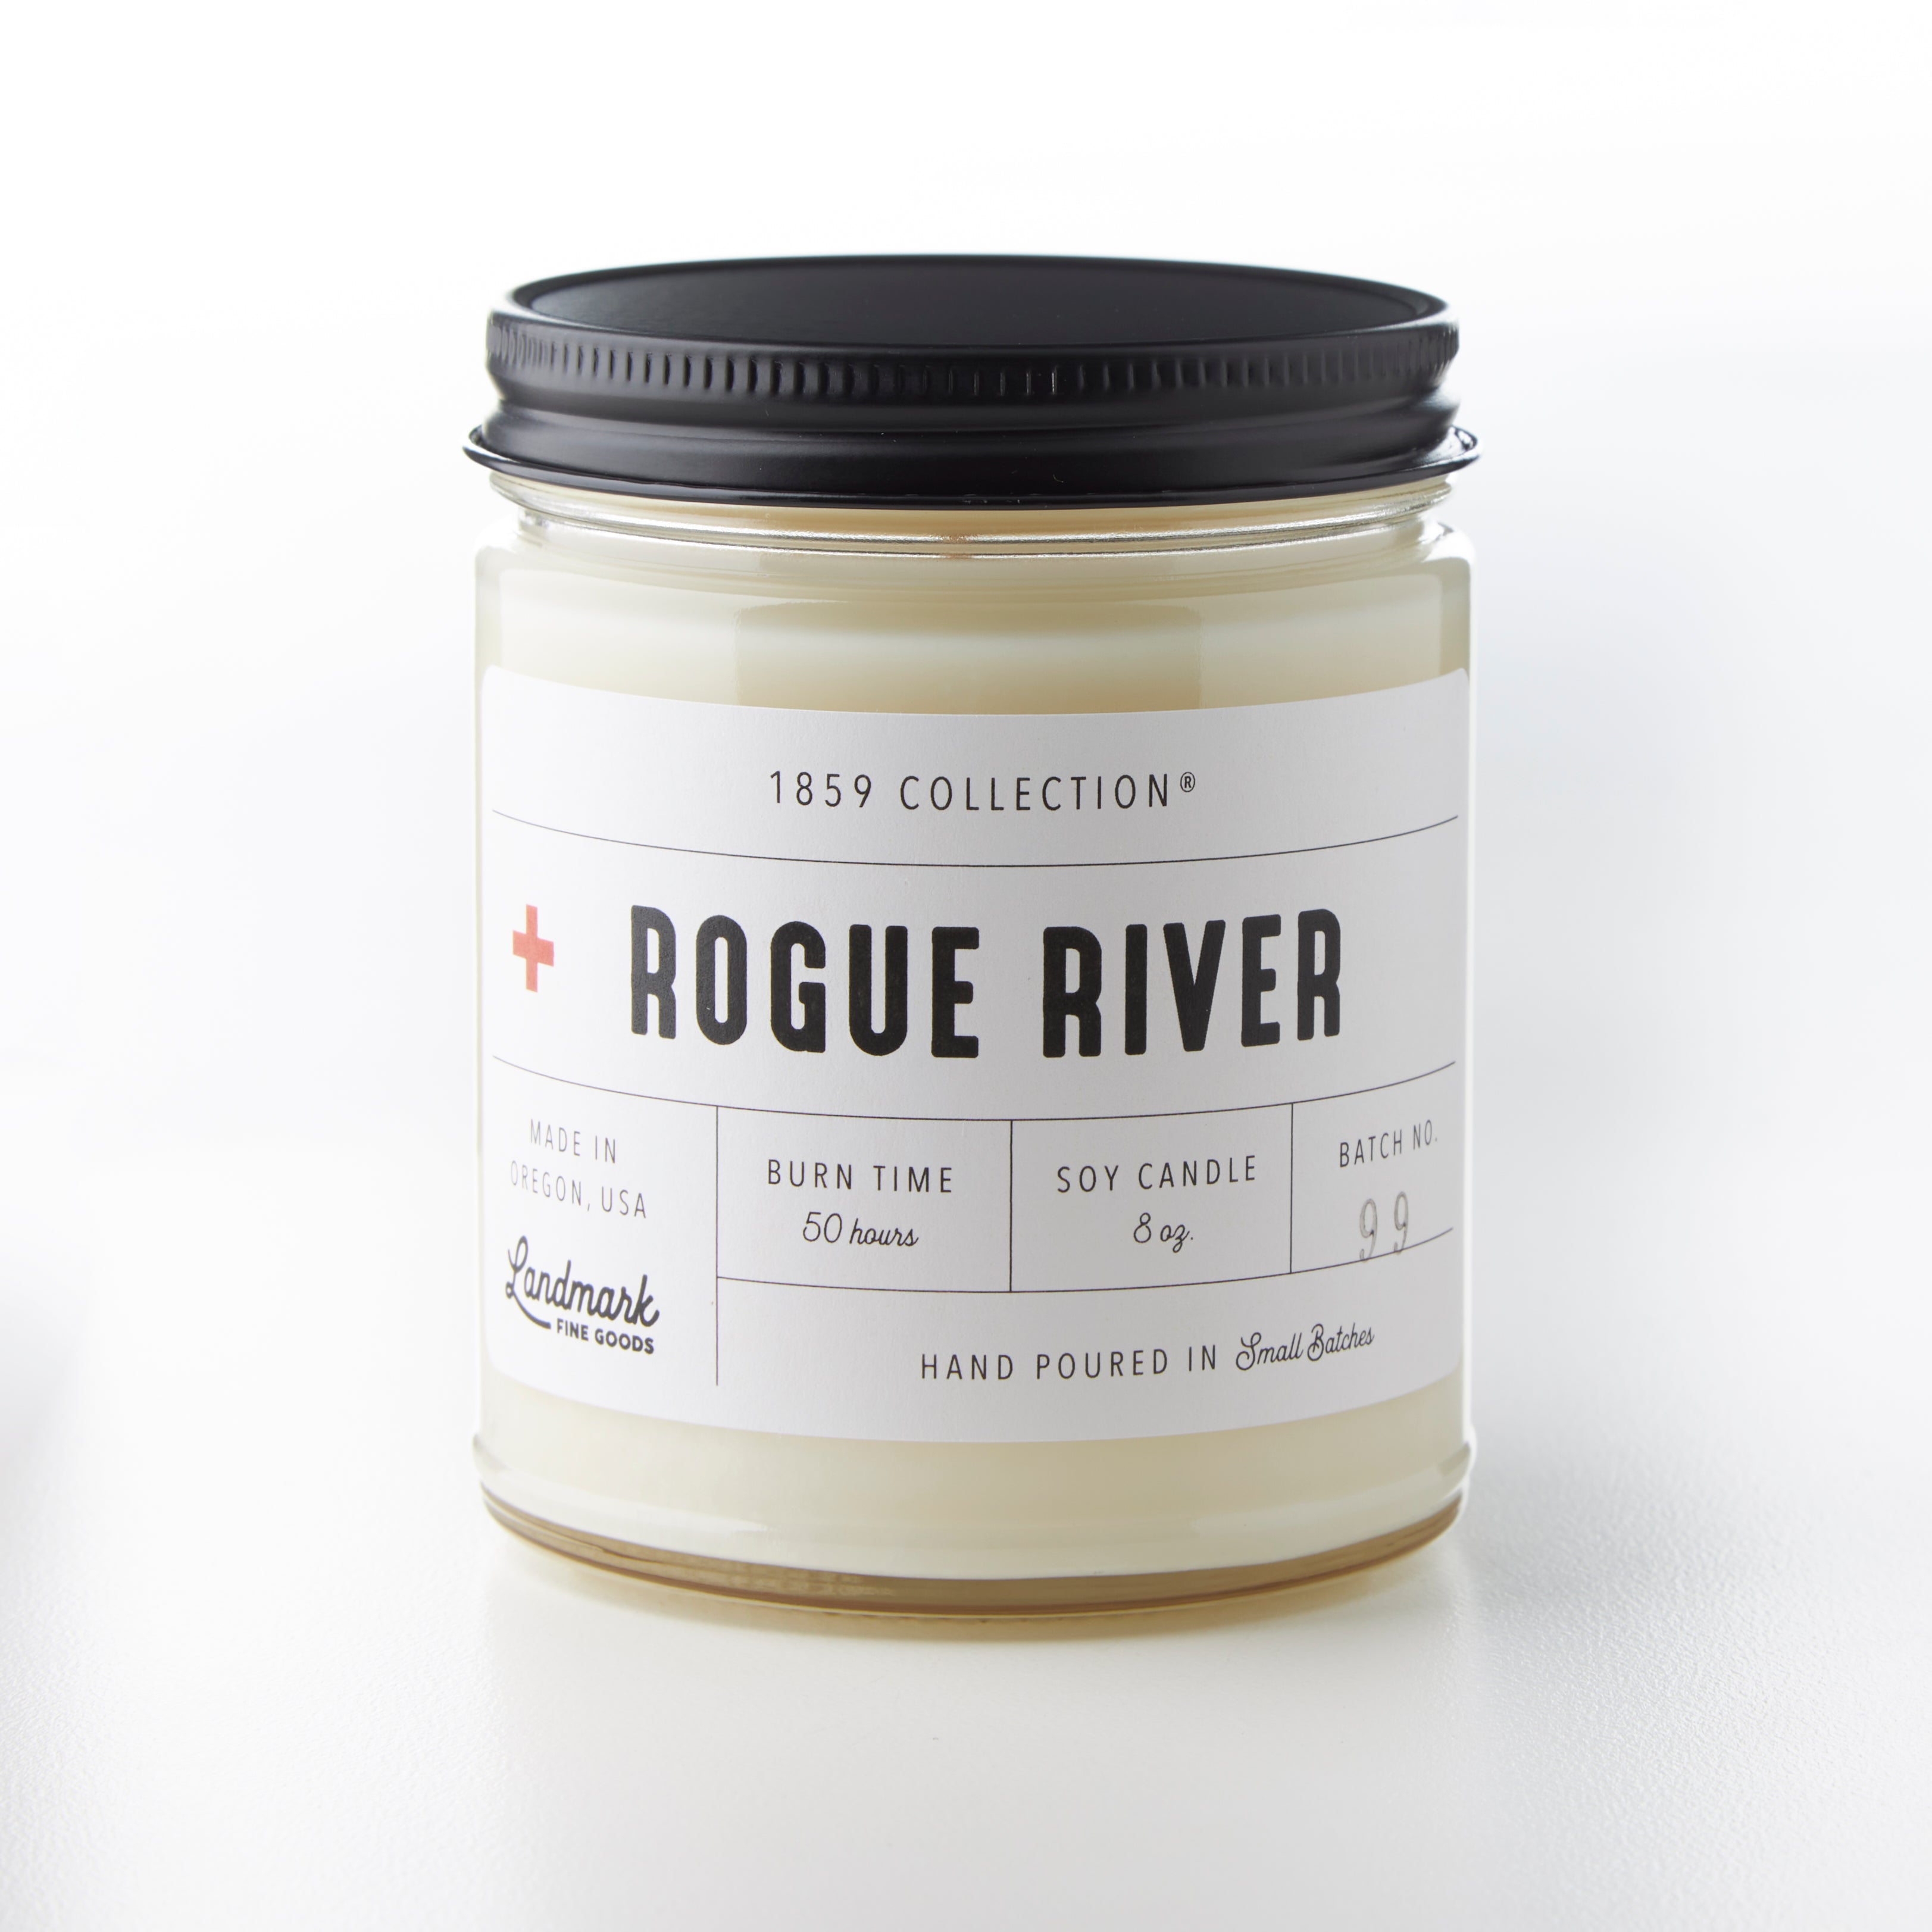 Rogue River Candle - 1859 Collection®